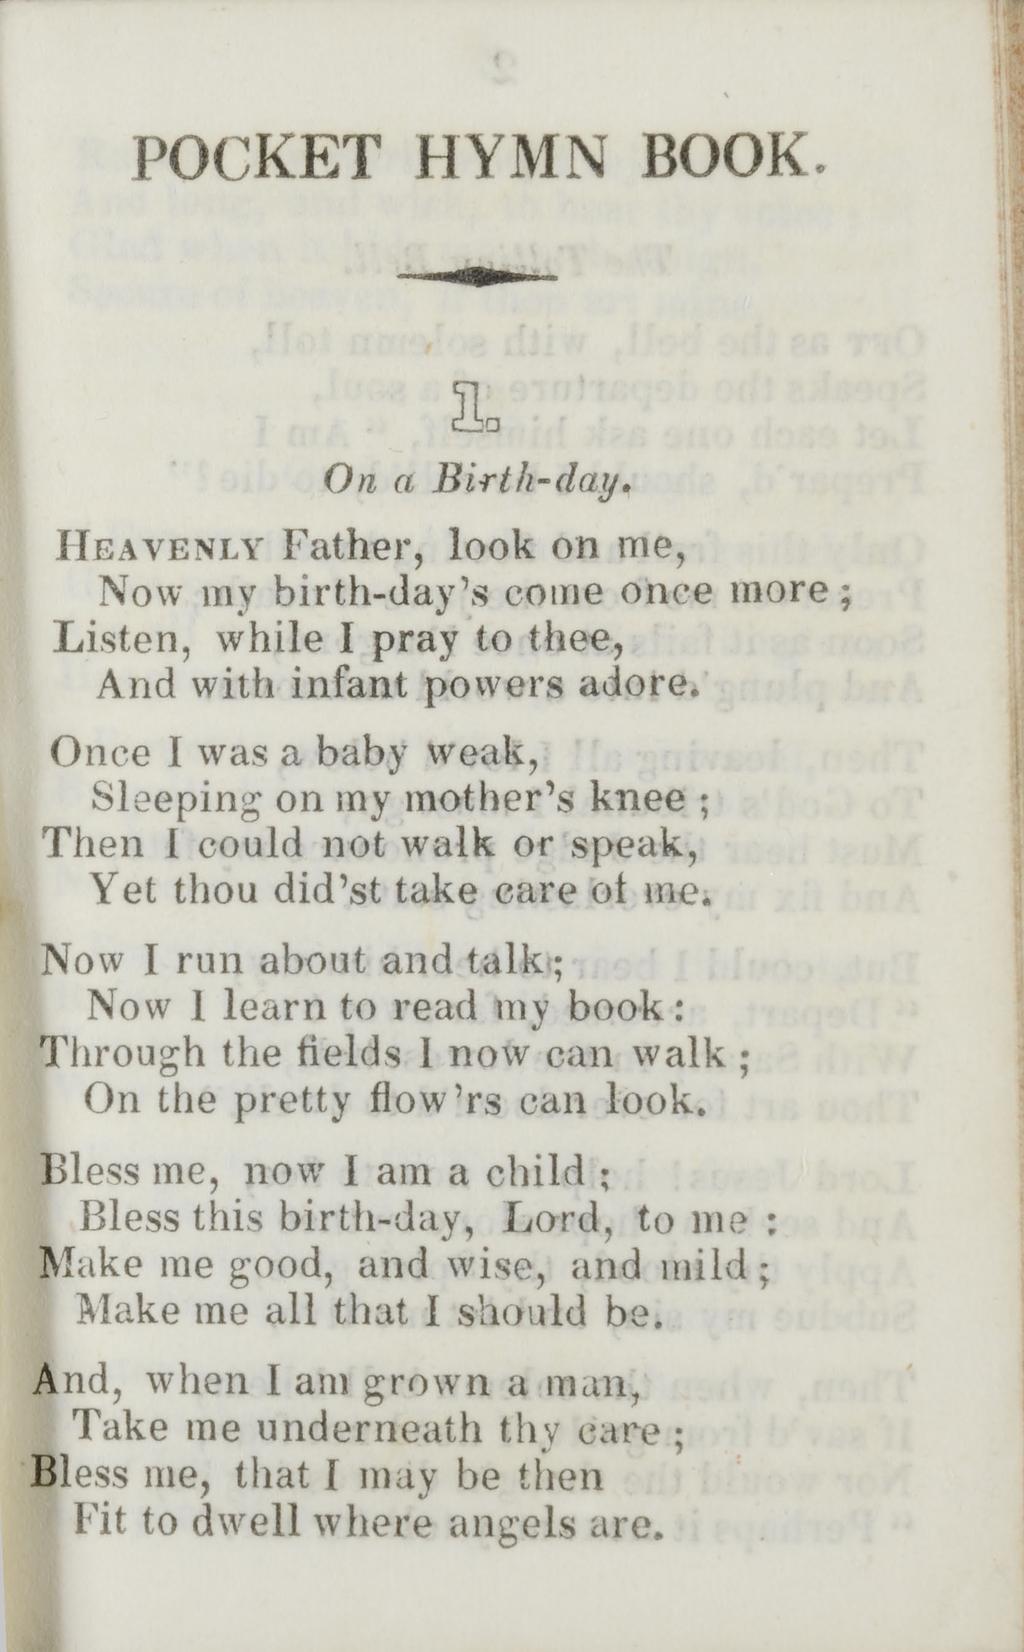 POCKET HYMN BOOK. 1. On a Birth-day. H e a v e n l y Father, look on me, Now my birth-day s come once more Listen, while I pray to thee, And with infant powers adore.